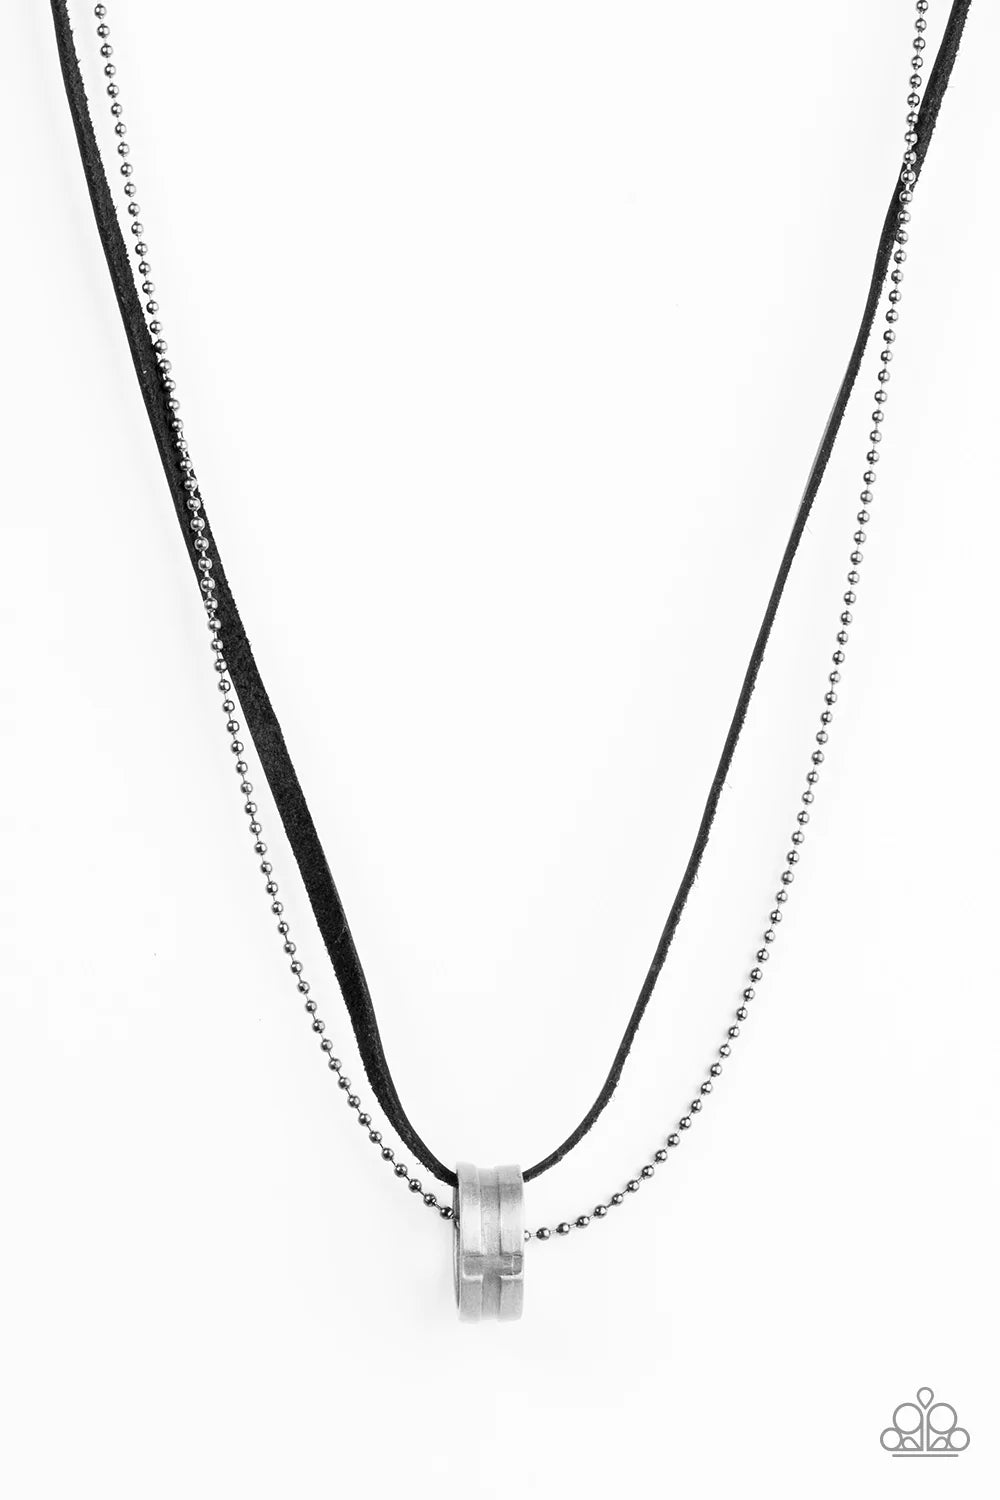 Paparazzi Necklace ~ The Ring Bearer - Black